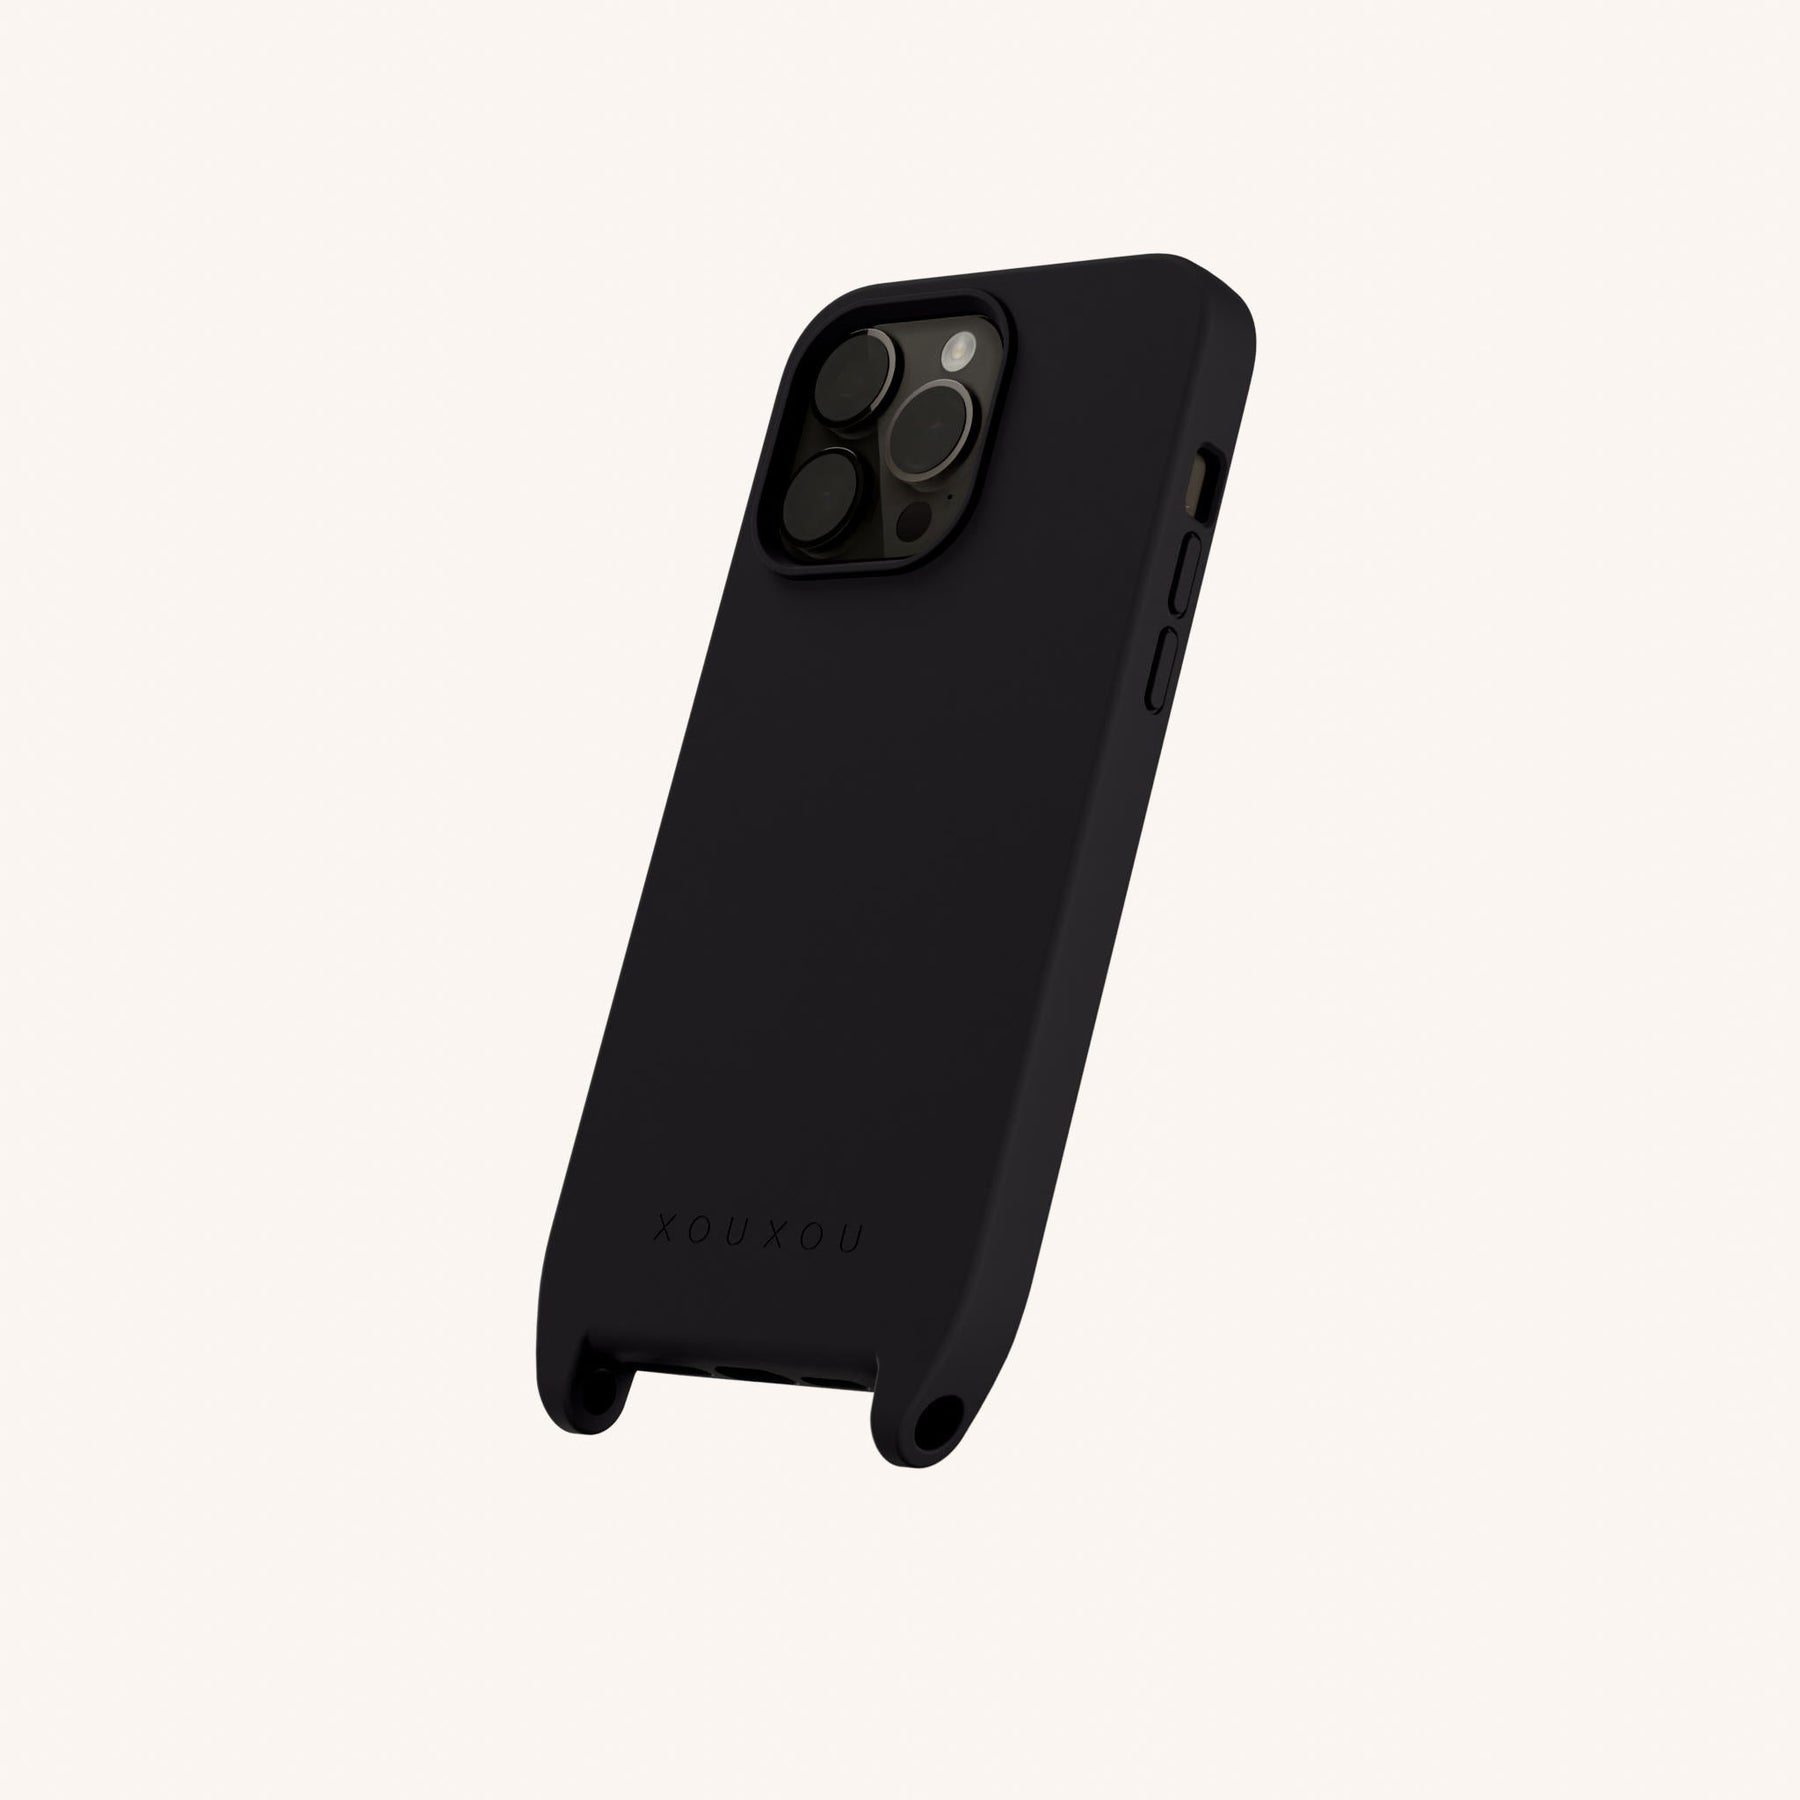 Phone Case with Eyelets in Black